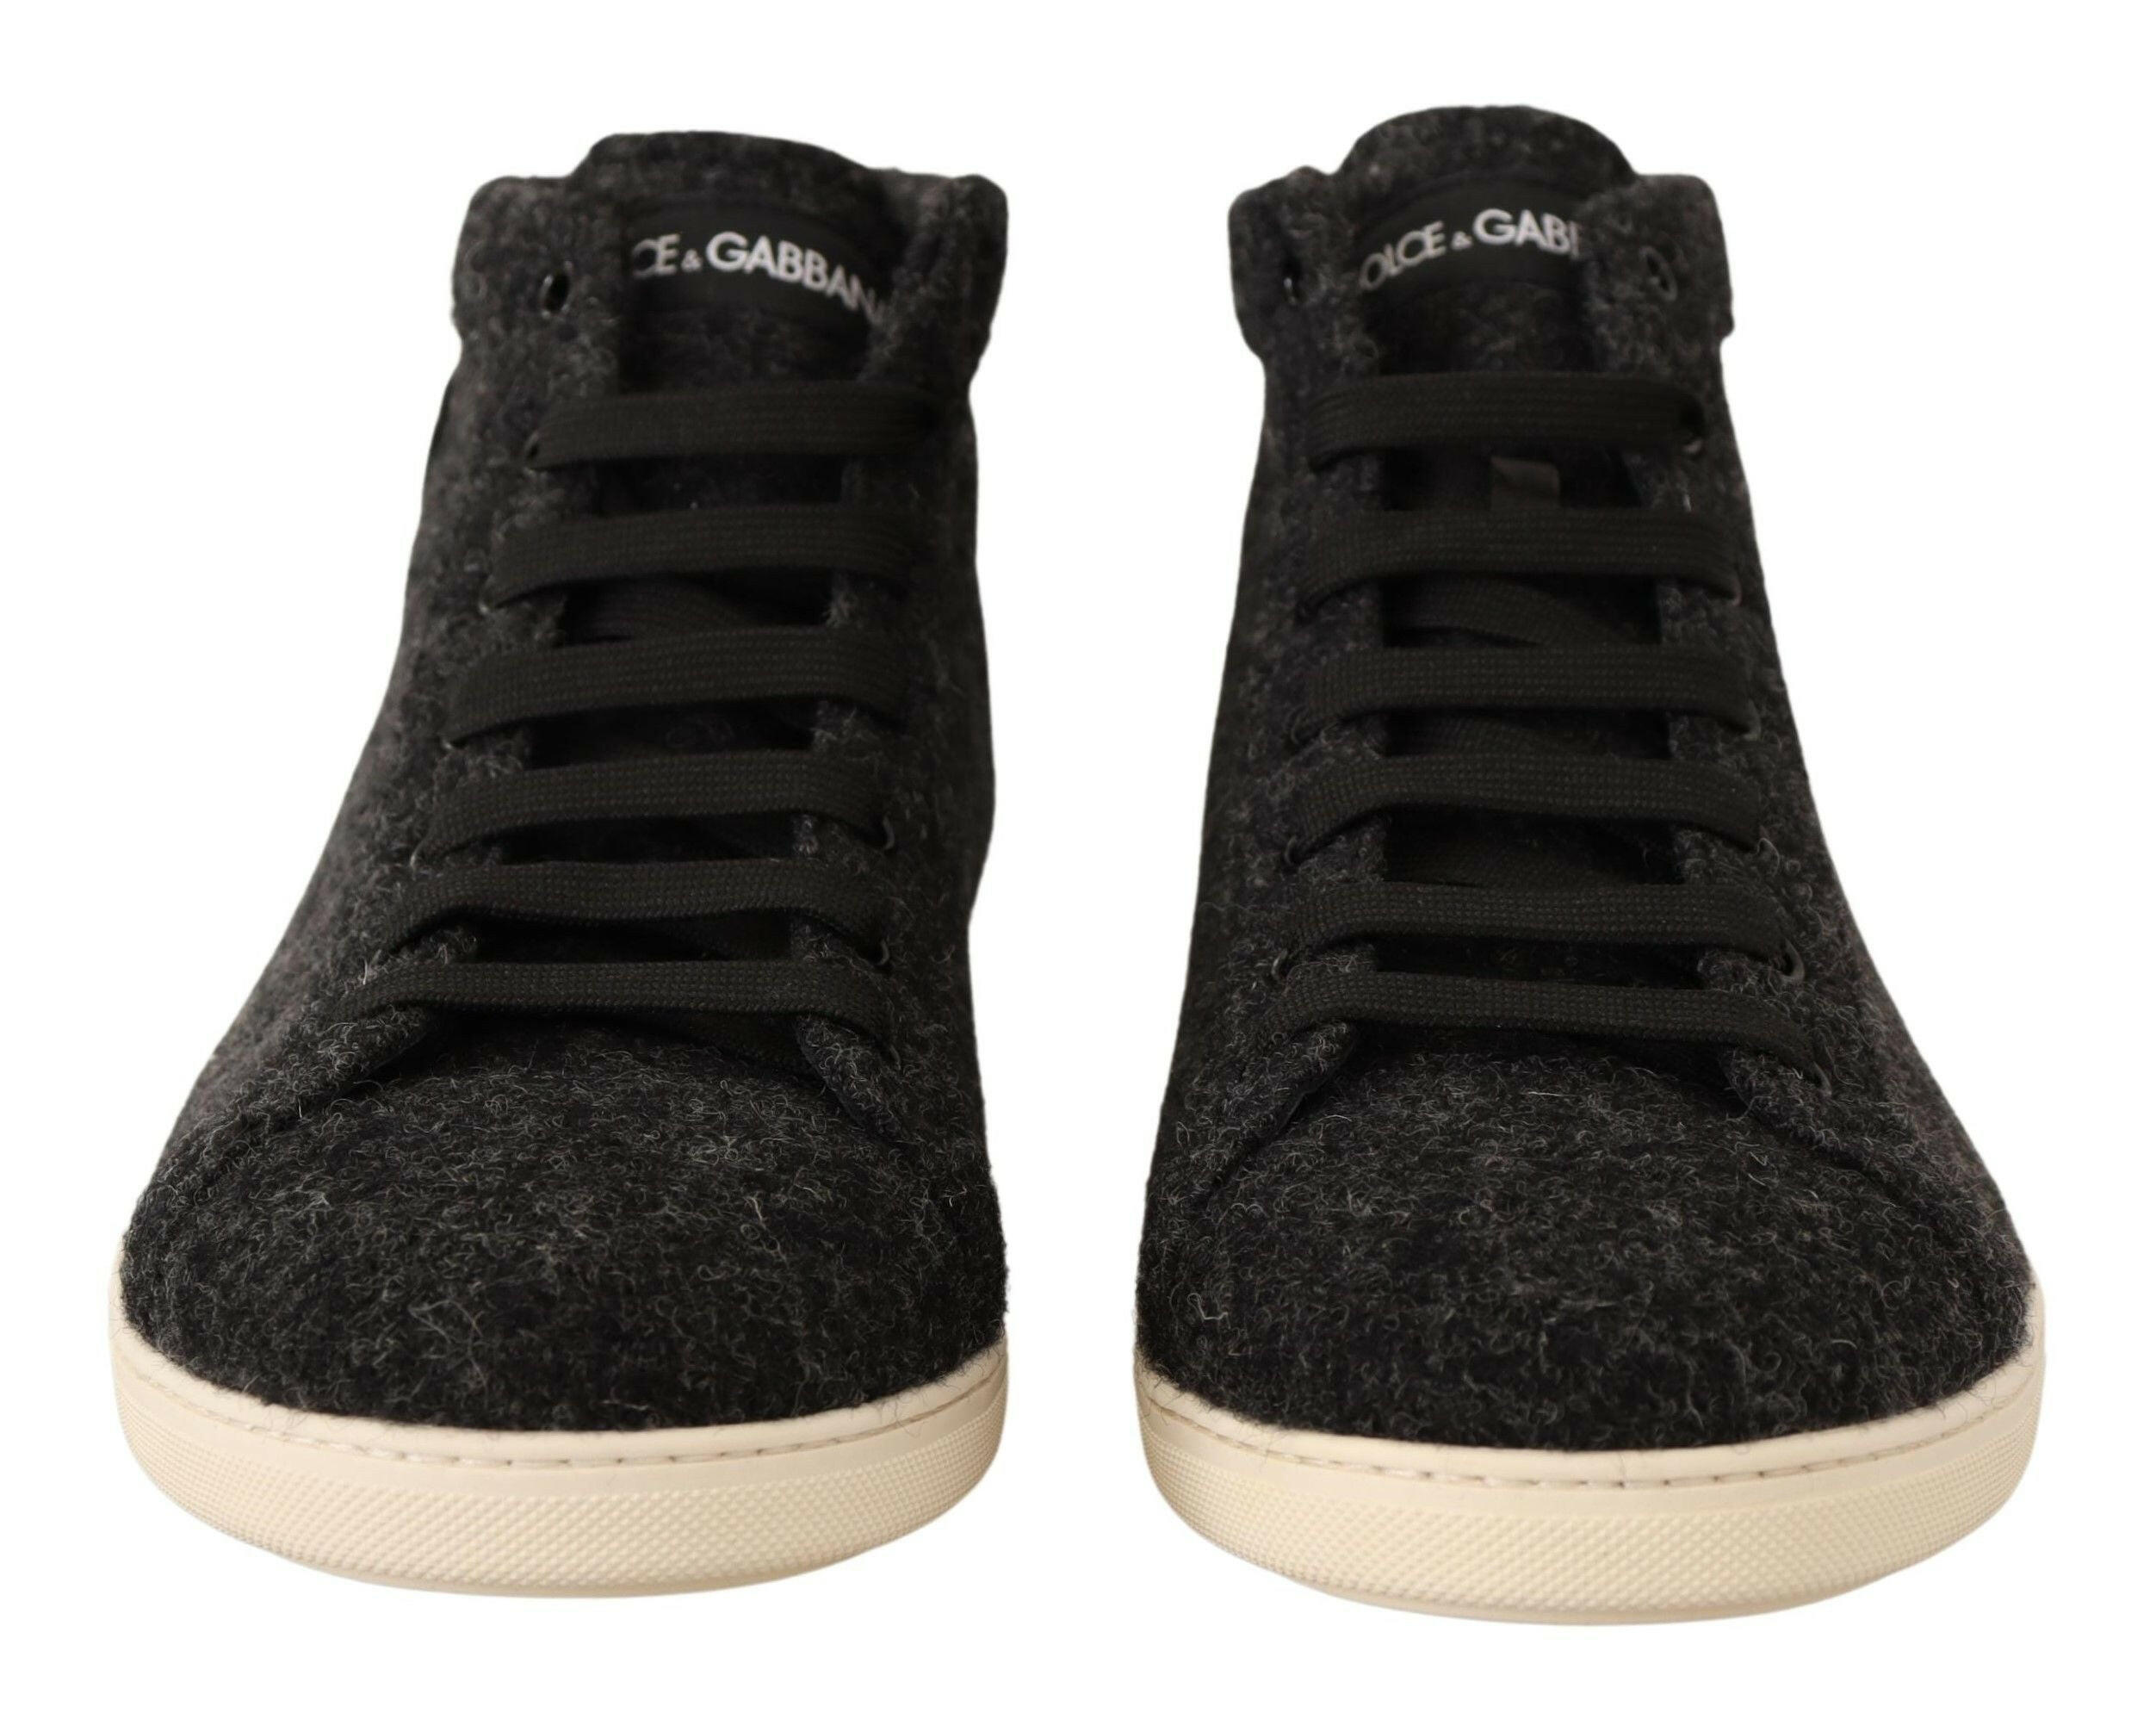 Dolce & Gabbana Gray Wool Cotton Casual High Top Sneakers - GENUINE AUTHENTIC BRAND LLC  